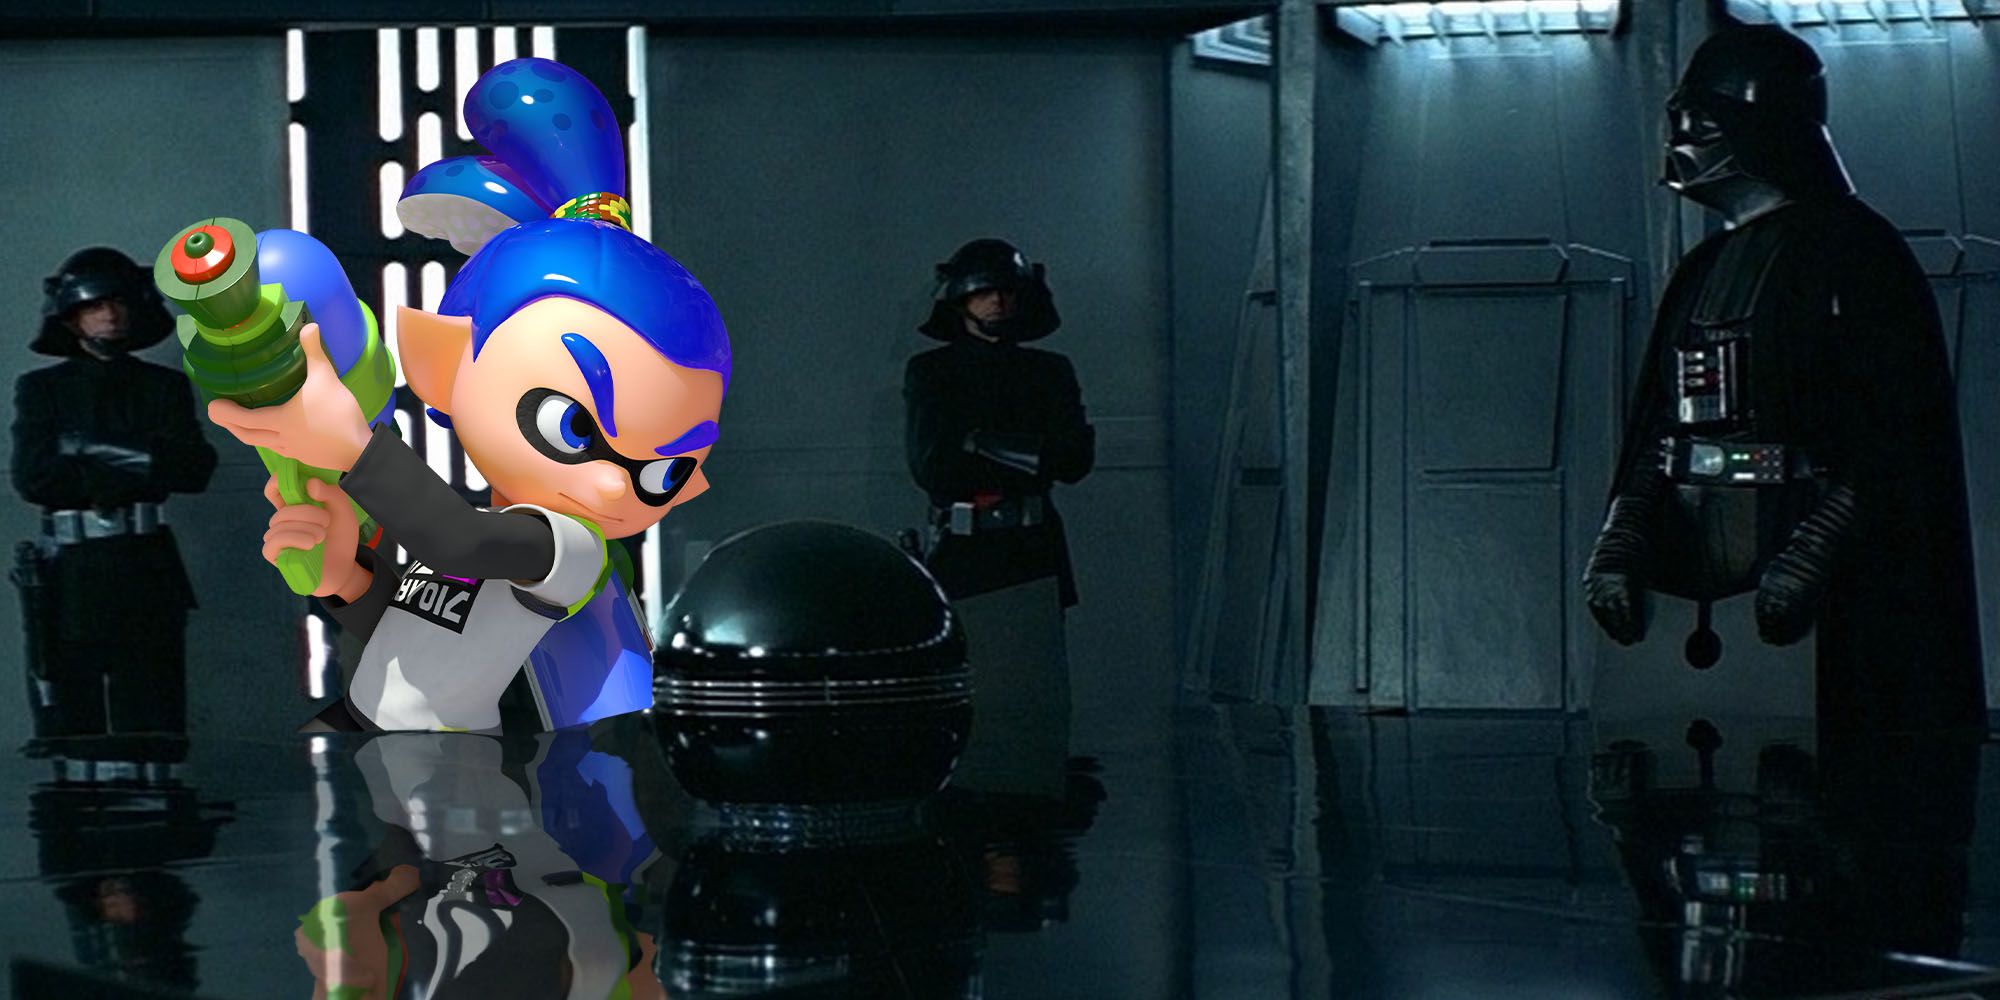 Splatoon character in Star Wars: A New Hope, looking at Darth Vader during a meeting